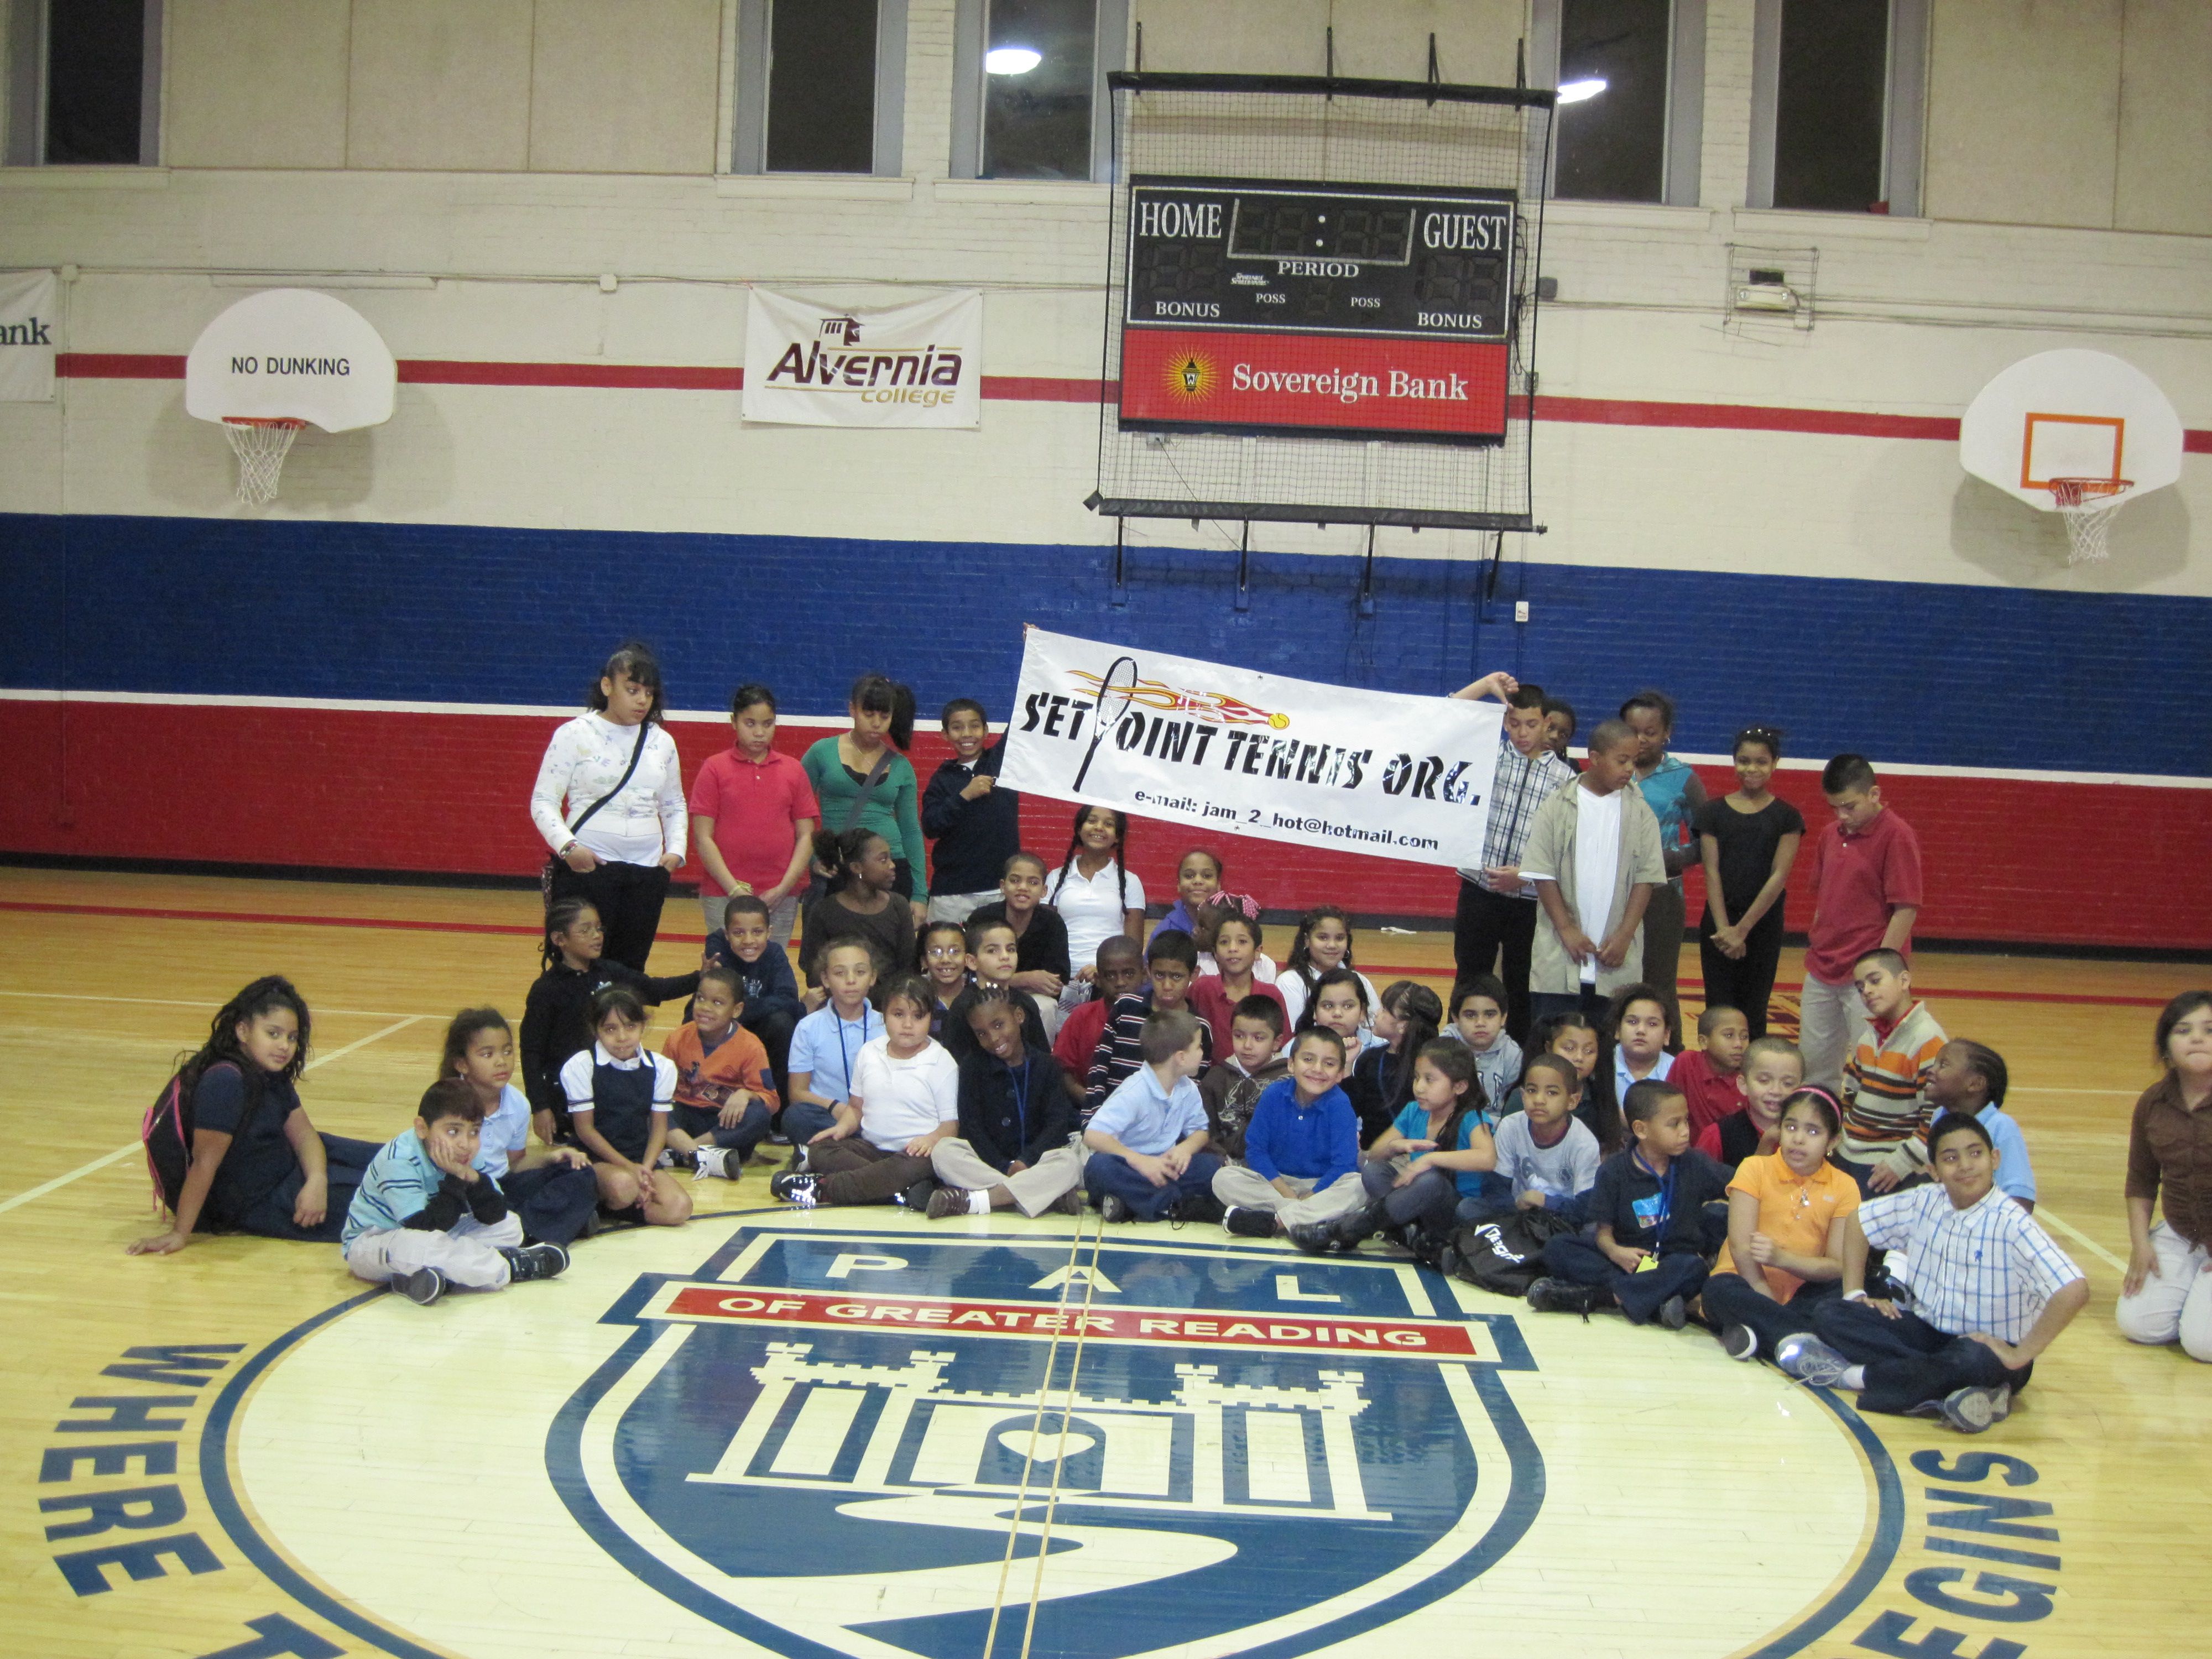 Youth at the Olivet Boys & Girls Club in the City of Reading Pa.